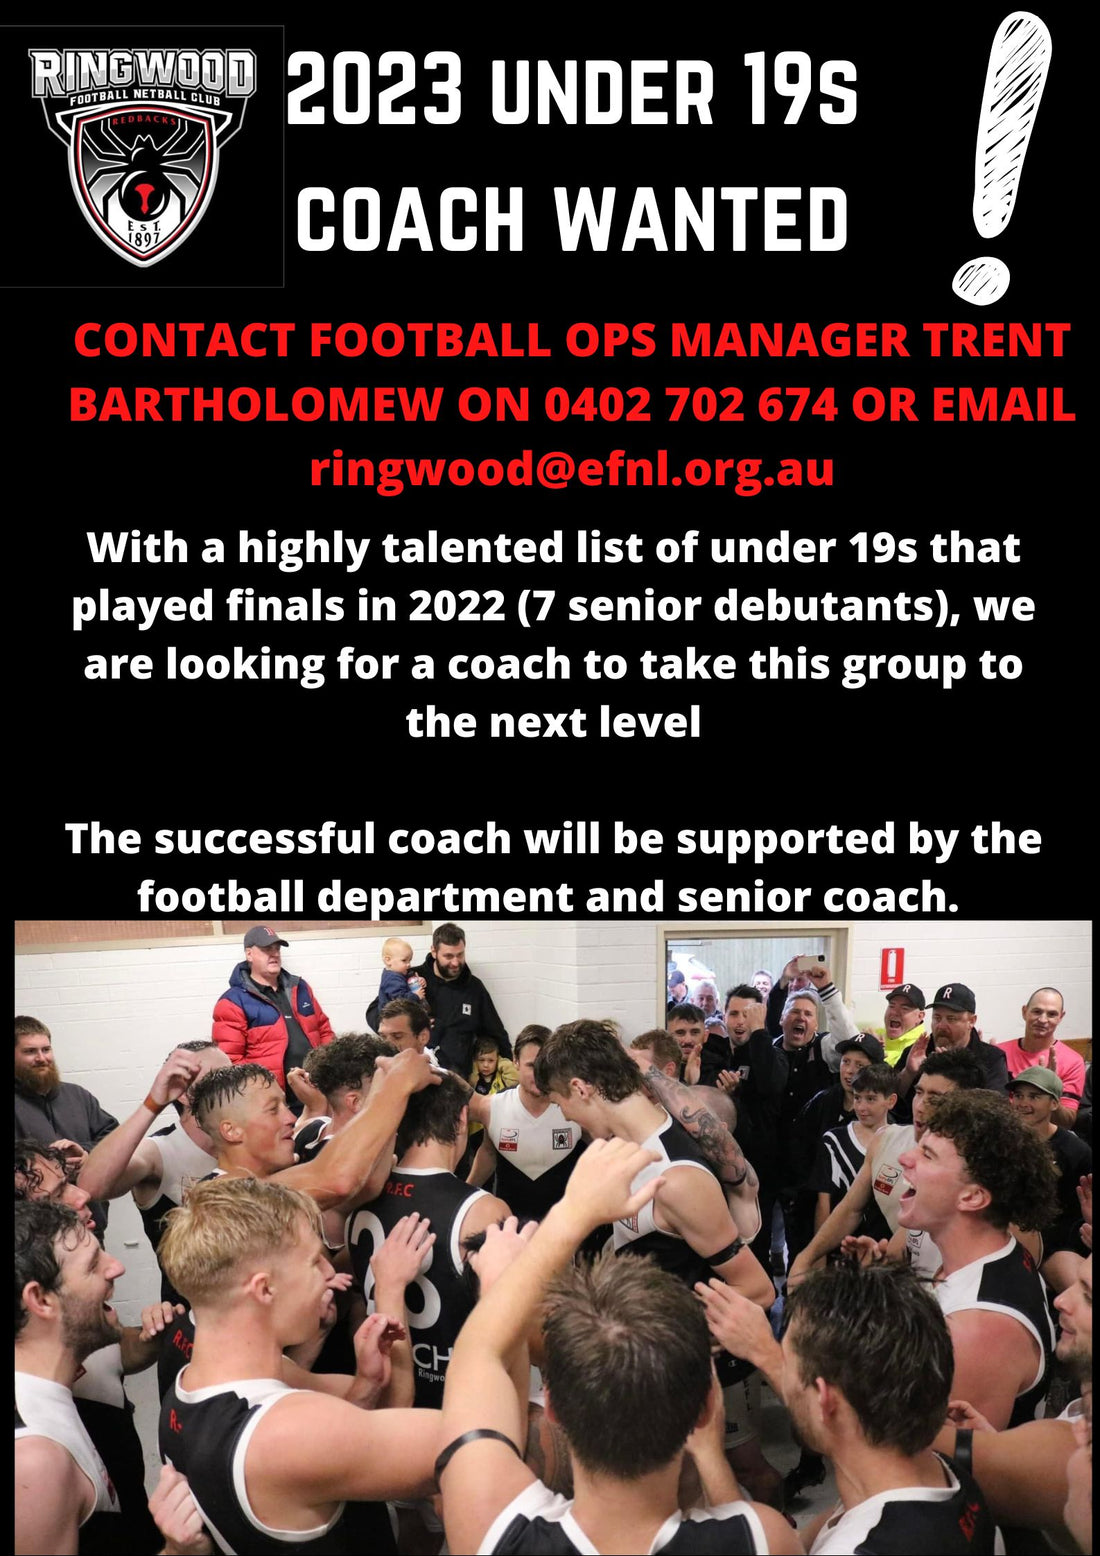 2023 Under 19s Coach Wanted